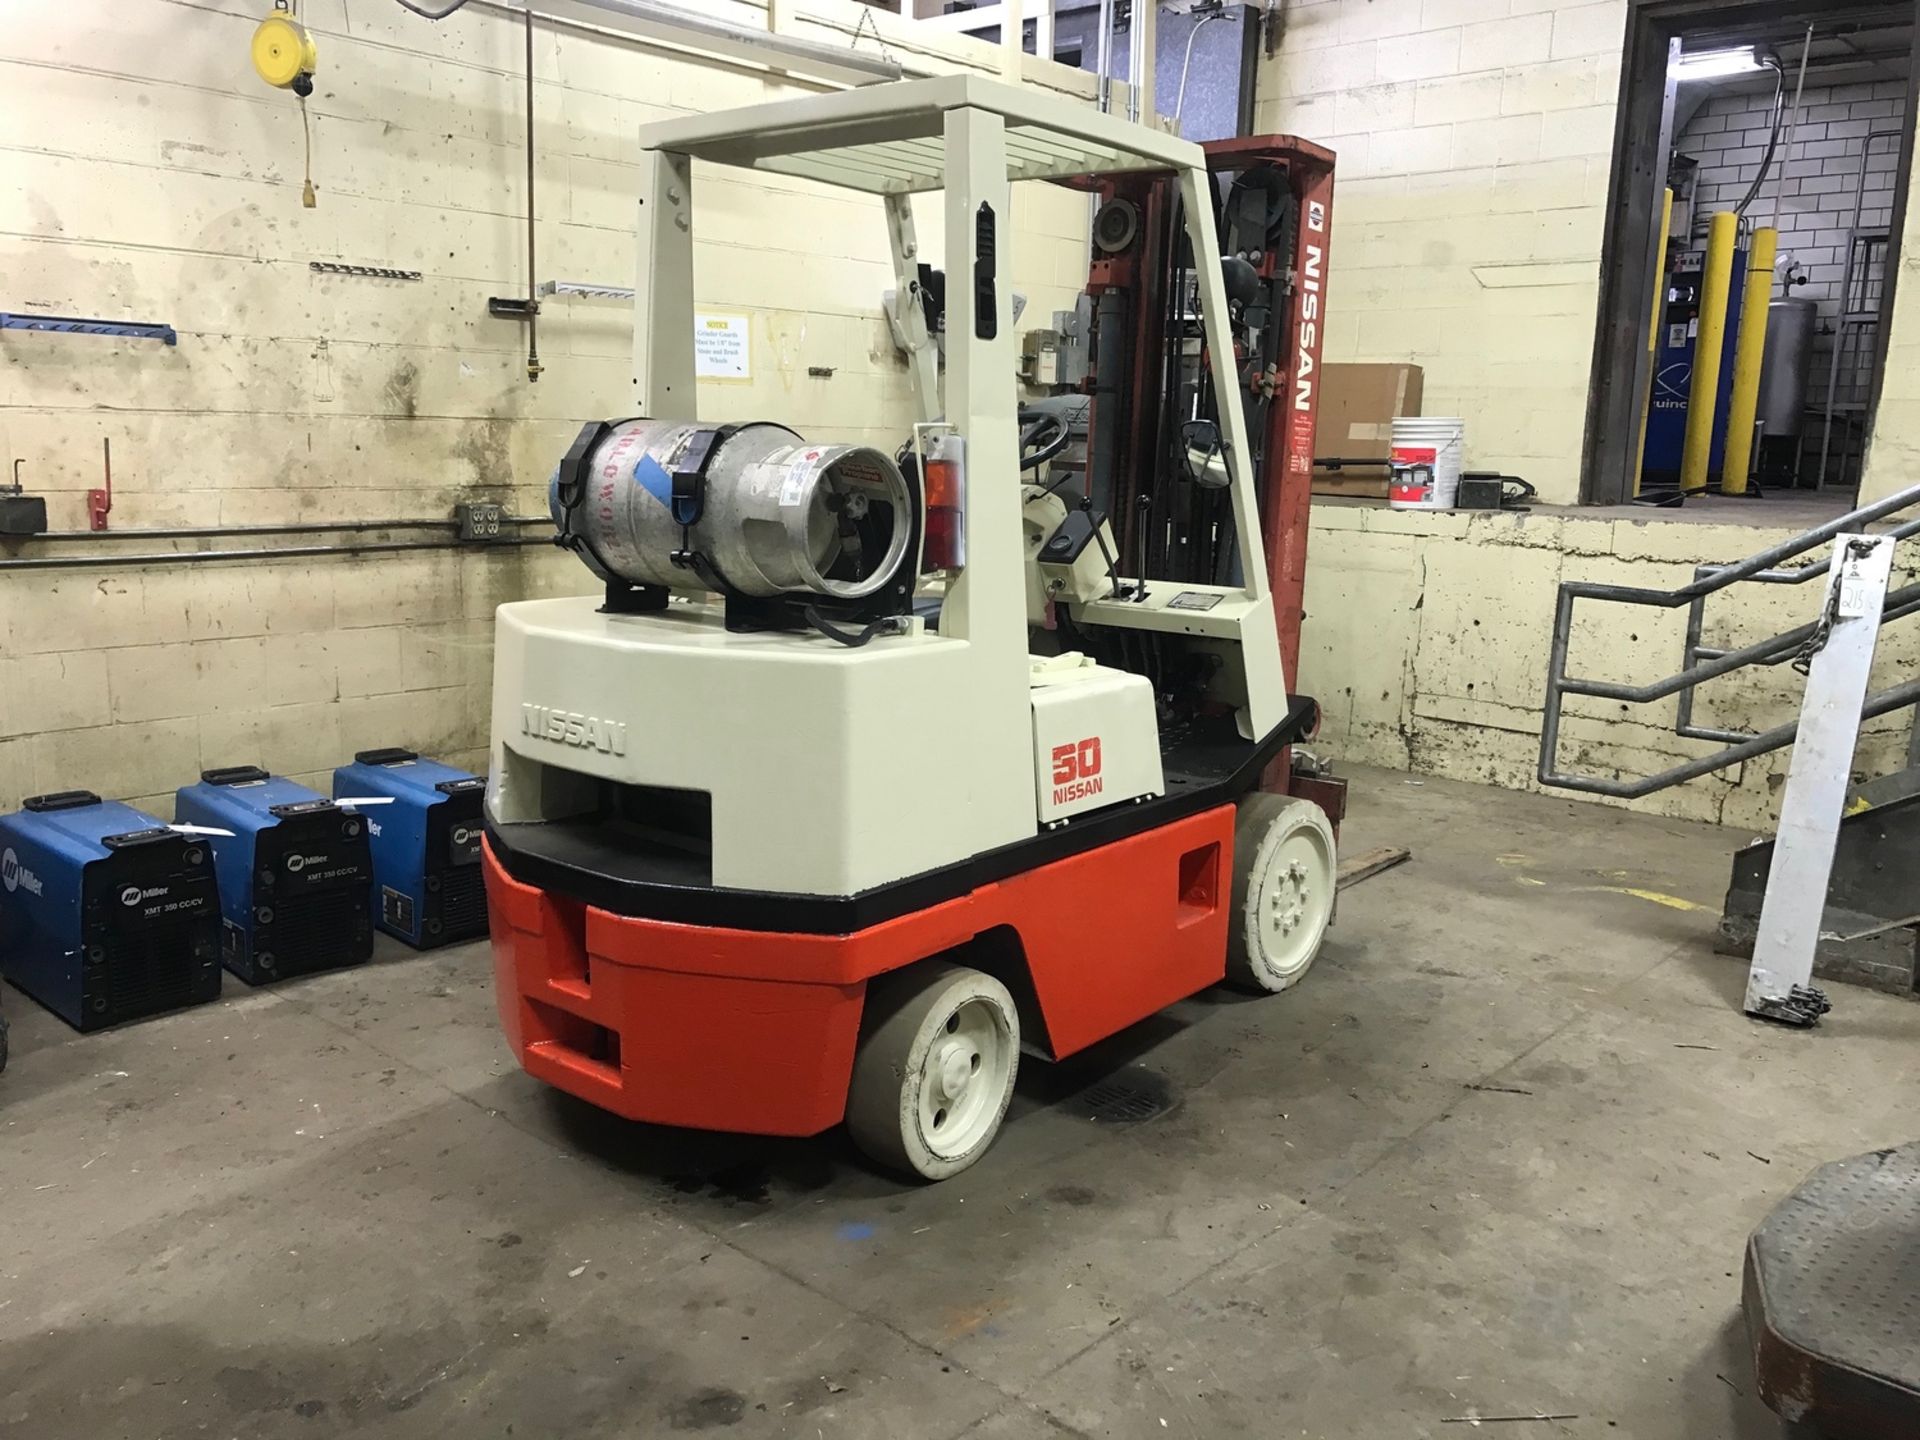 Nissan 5000lb Capacity Fork Lift, Model # CPH02A25V, Non Marking Tires, Side Shift, 3 Stage Mast, - Image 3 of 6